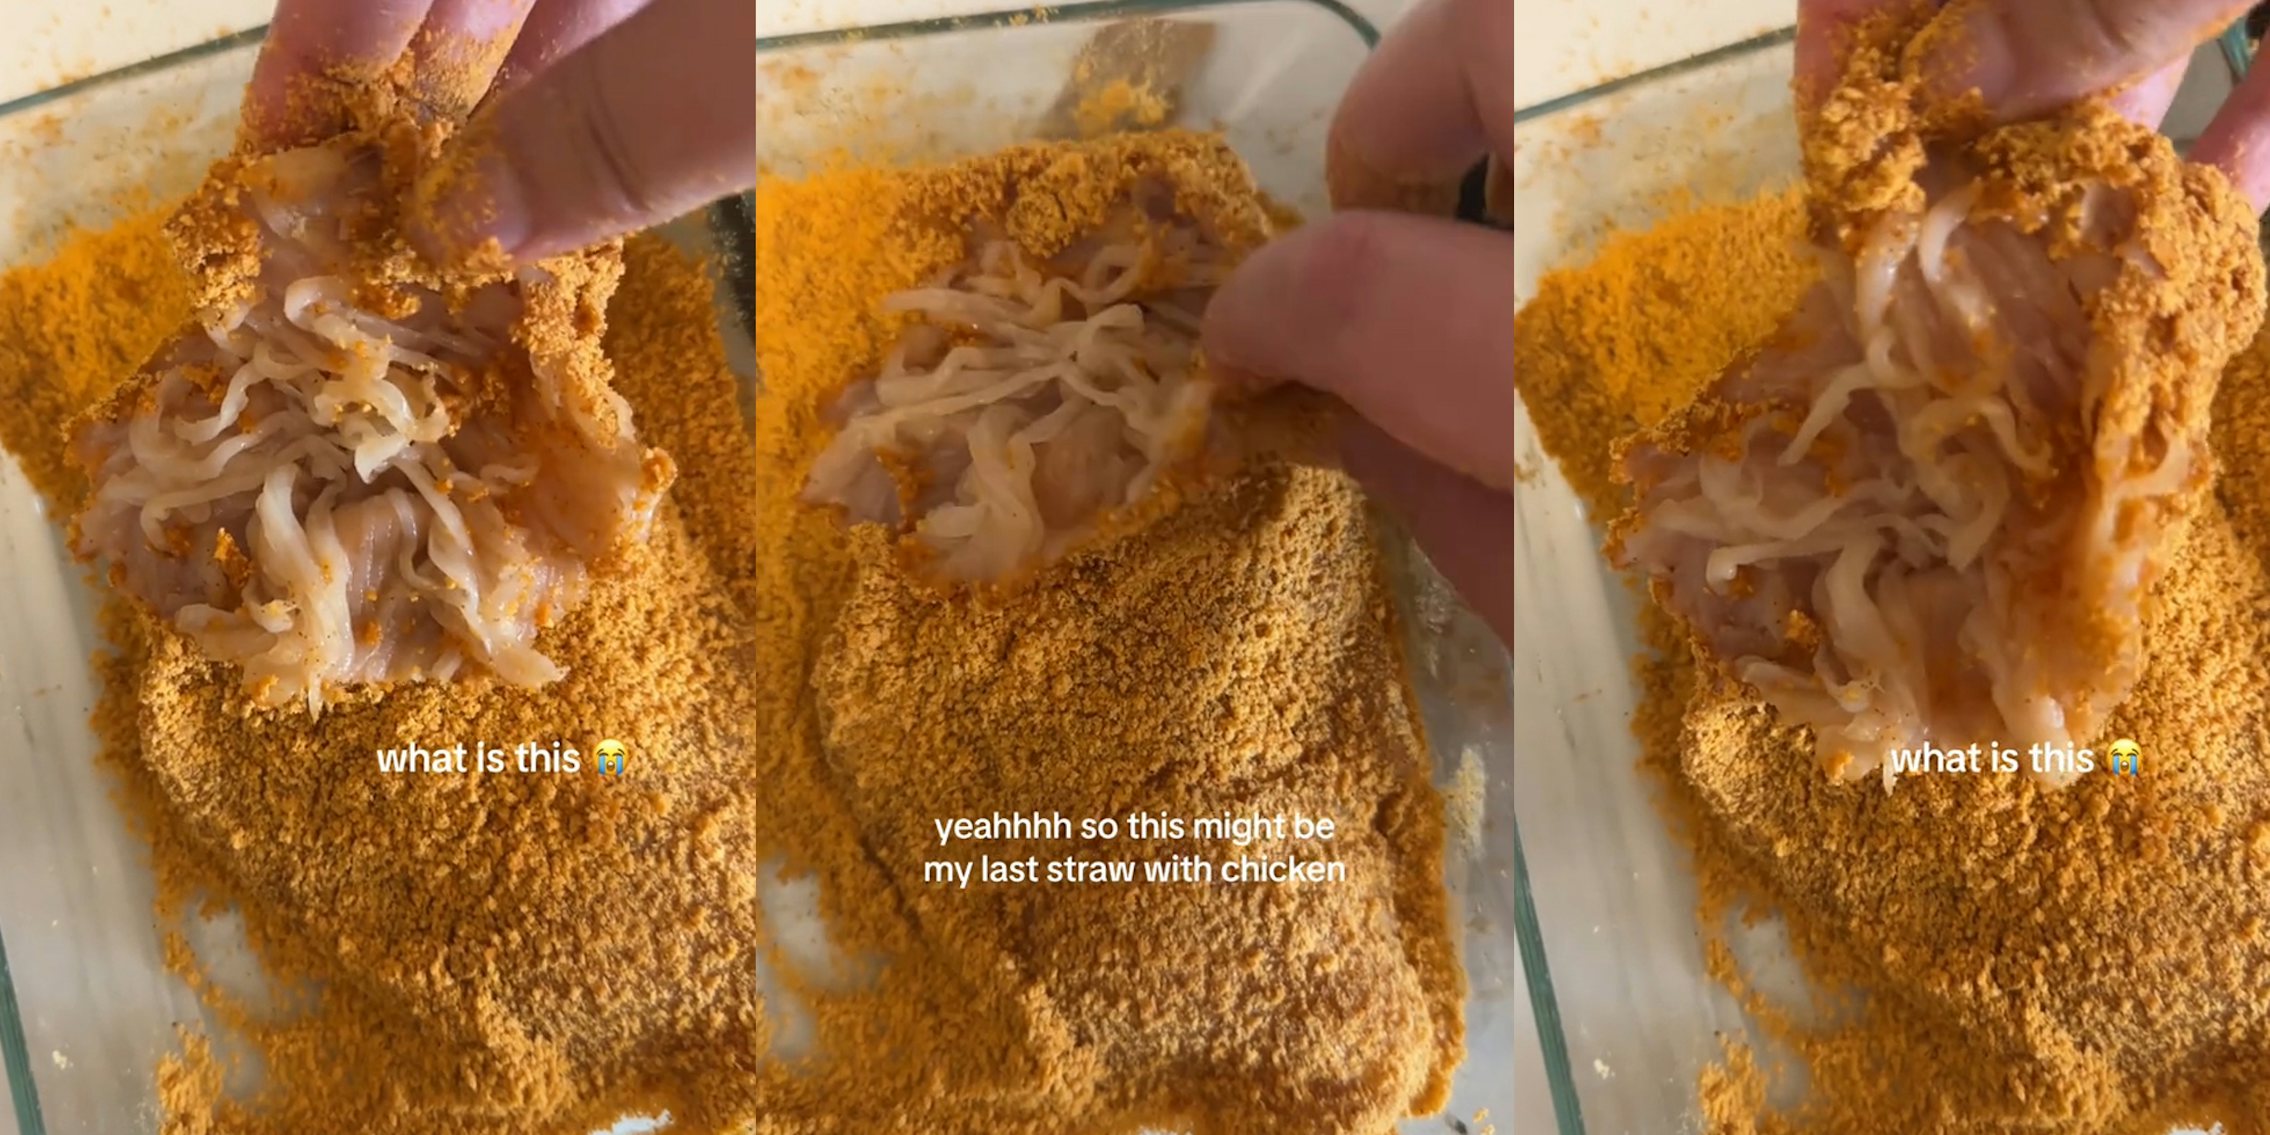 hand holding flap of cut chicken breaded in bowl with caption 'what is this' (l) hand holding flap of cut chicken breaded in bowl with caption 'yeahhh so this might be my last straw with chicken' (c) hand holding flap of cut chicken breaded in bowl with caption 'what is this' (r)